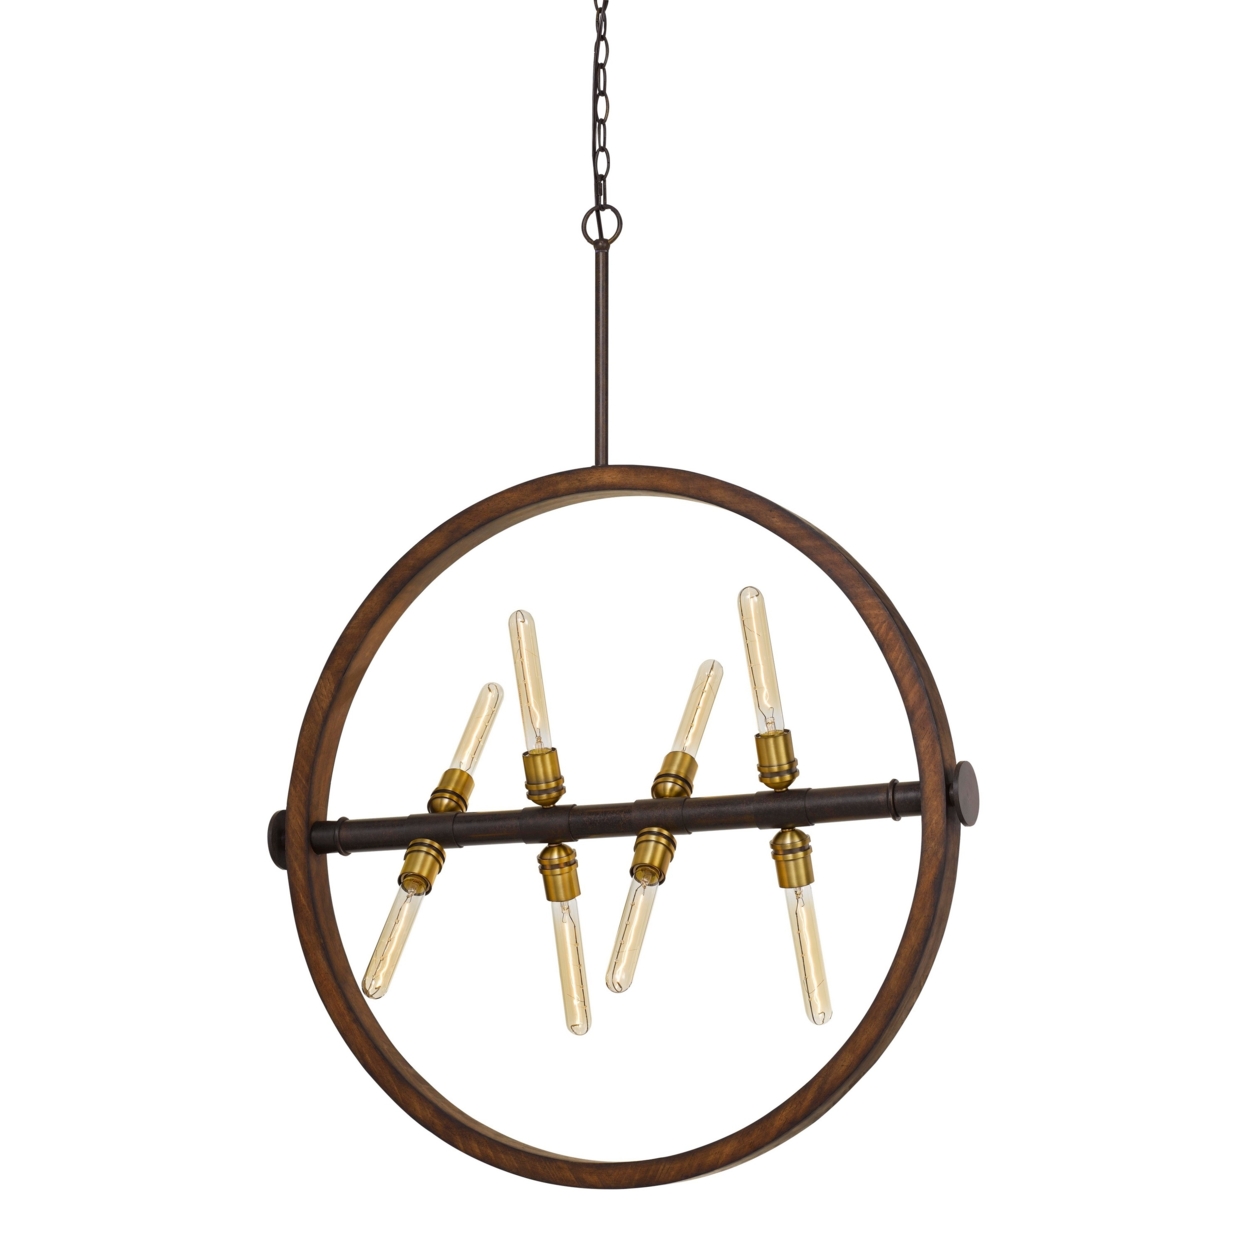 Round Wood Frame Chandelier With Metal Rod And Glass Shade,Bronze And Brown- Saltoro Sherpi